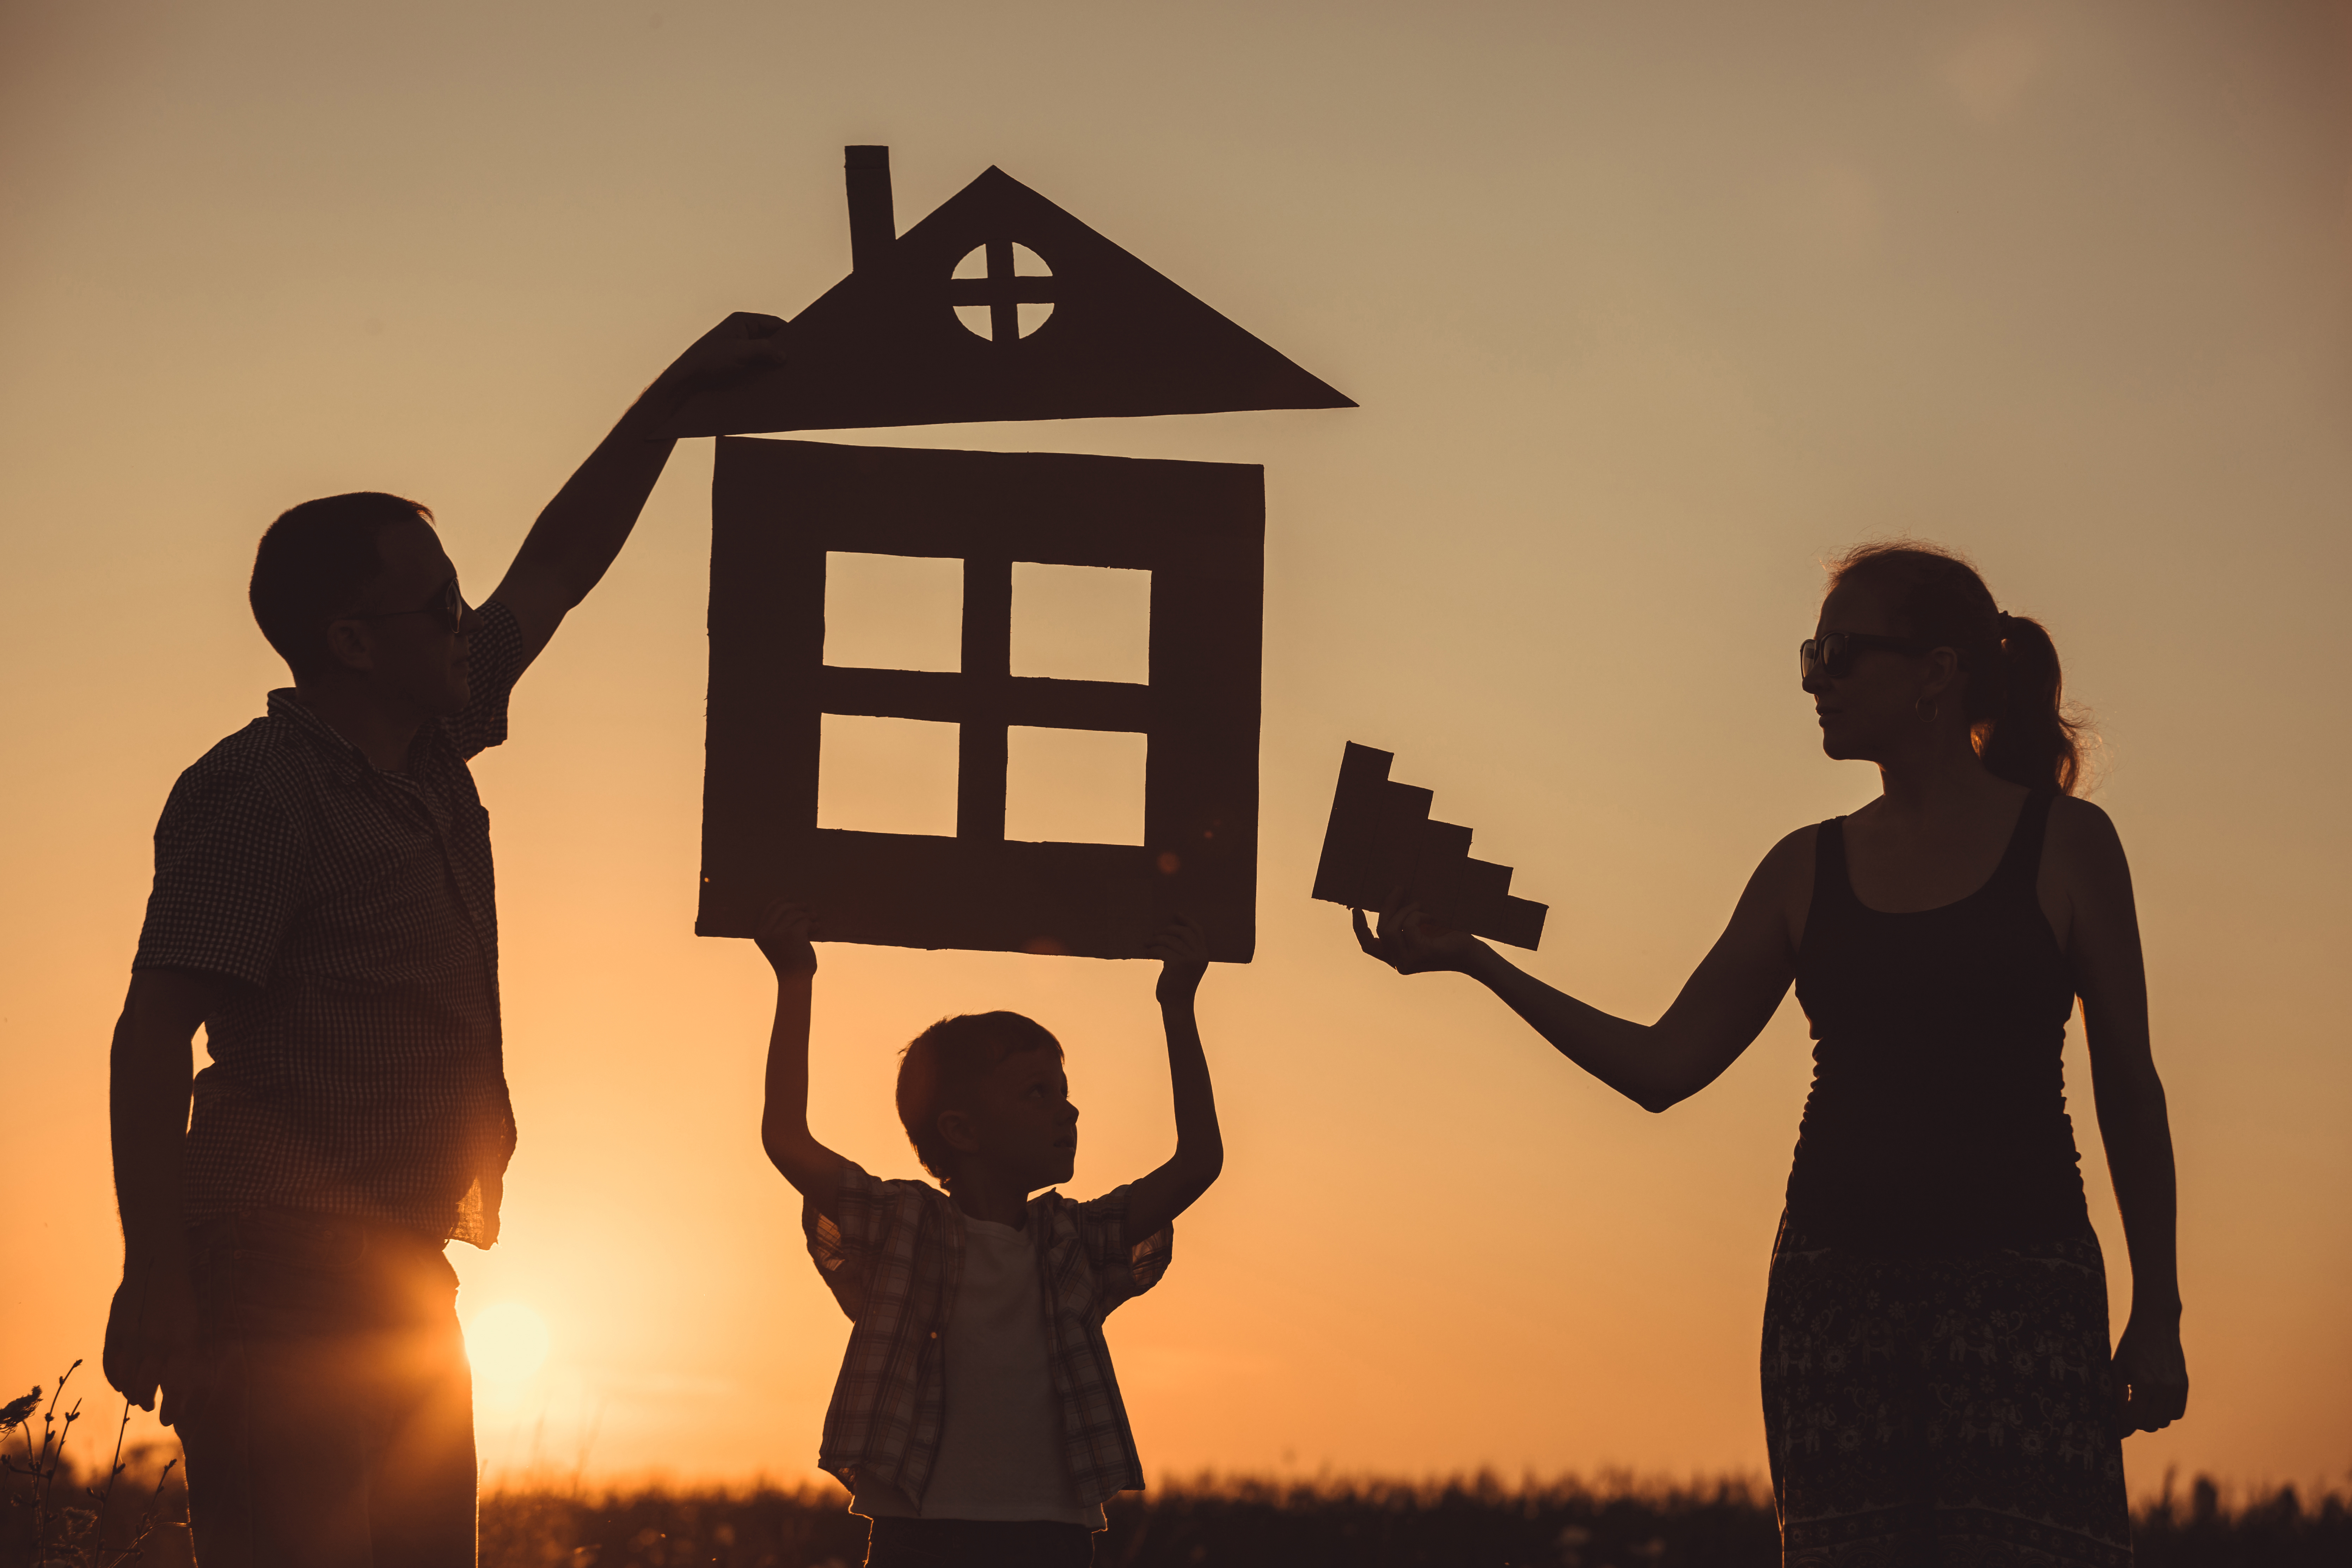 Silhouette of a family holding up cardboard cutouts of a house and stairs against a sunset, symbolizing the shared dream of homeownership.